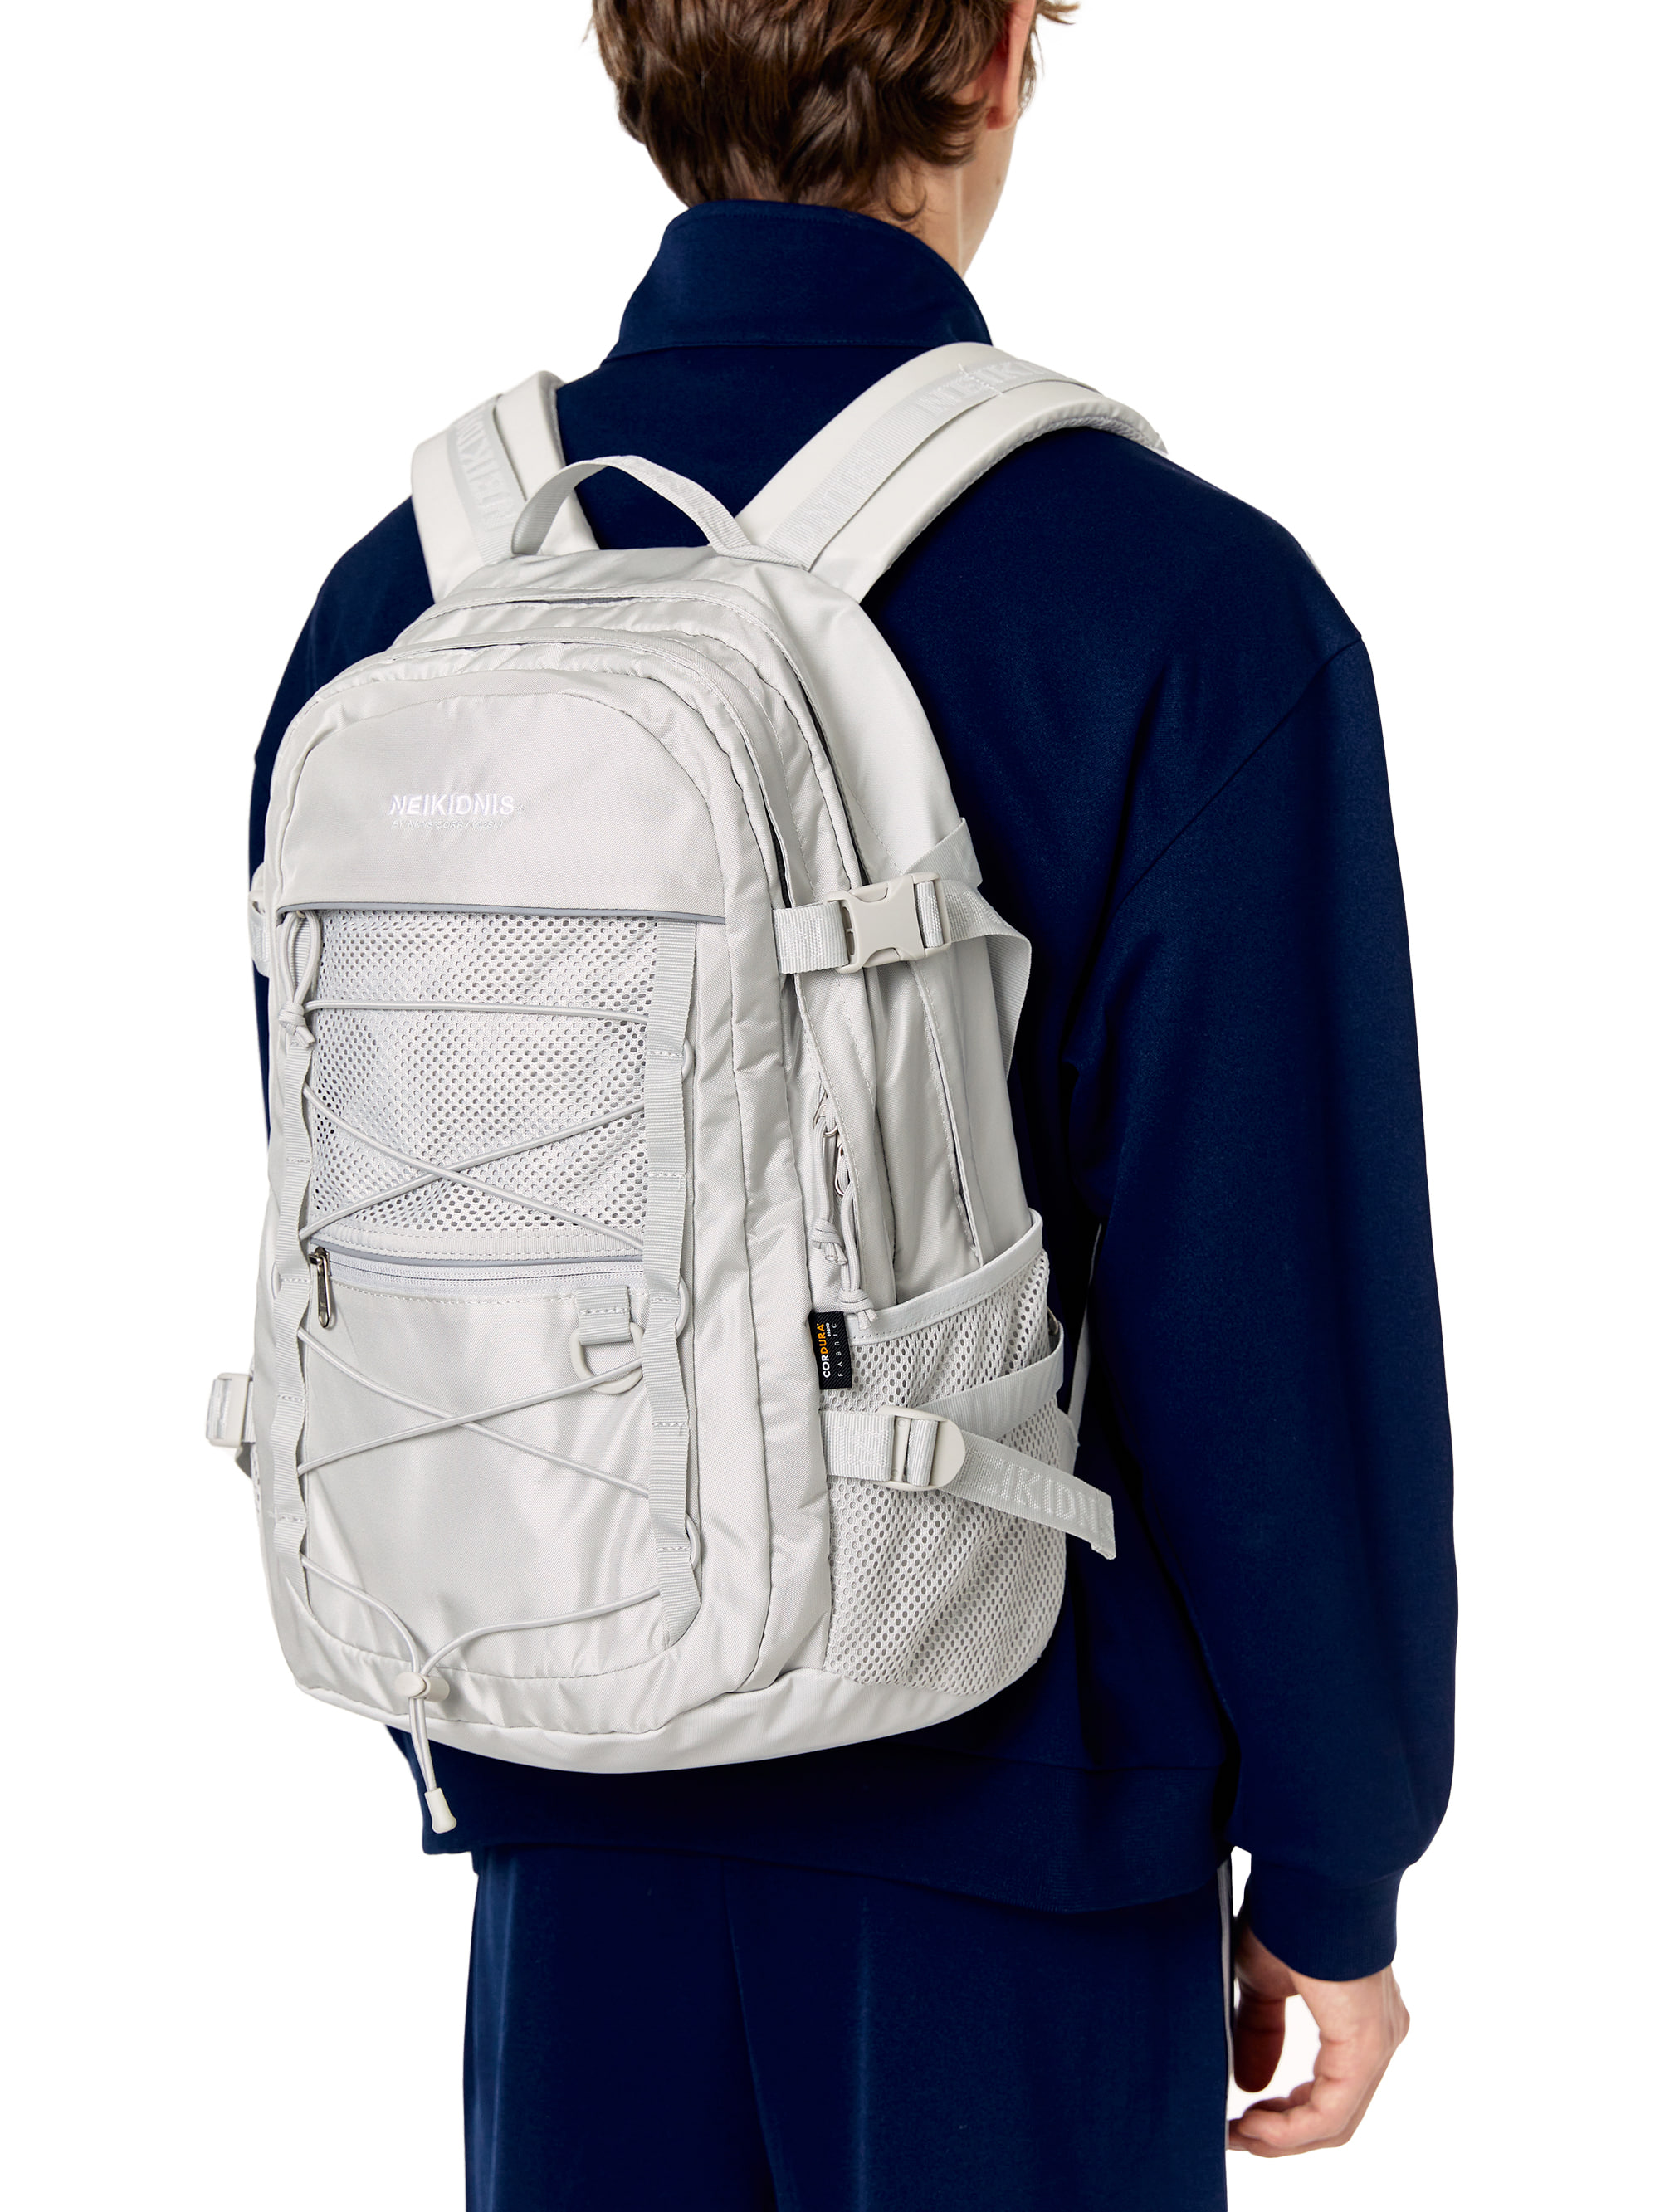 EVO STRING BACKPACK / MINERAL GRAY